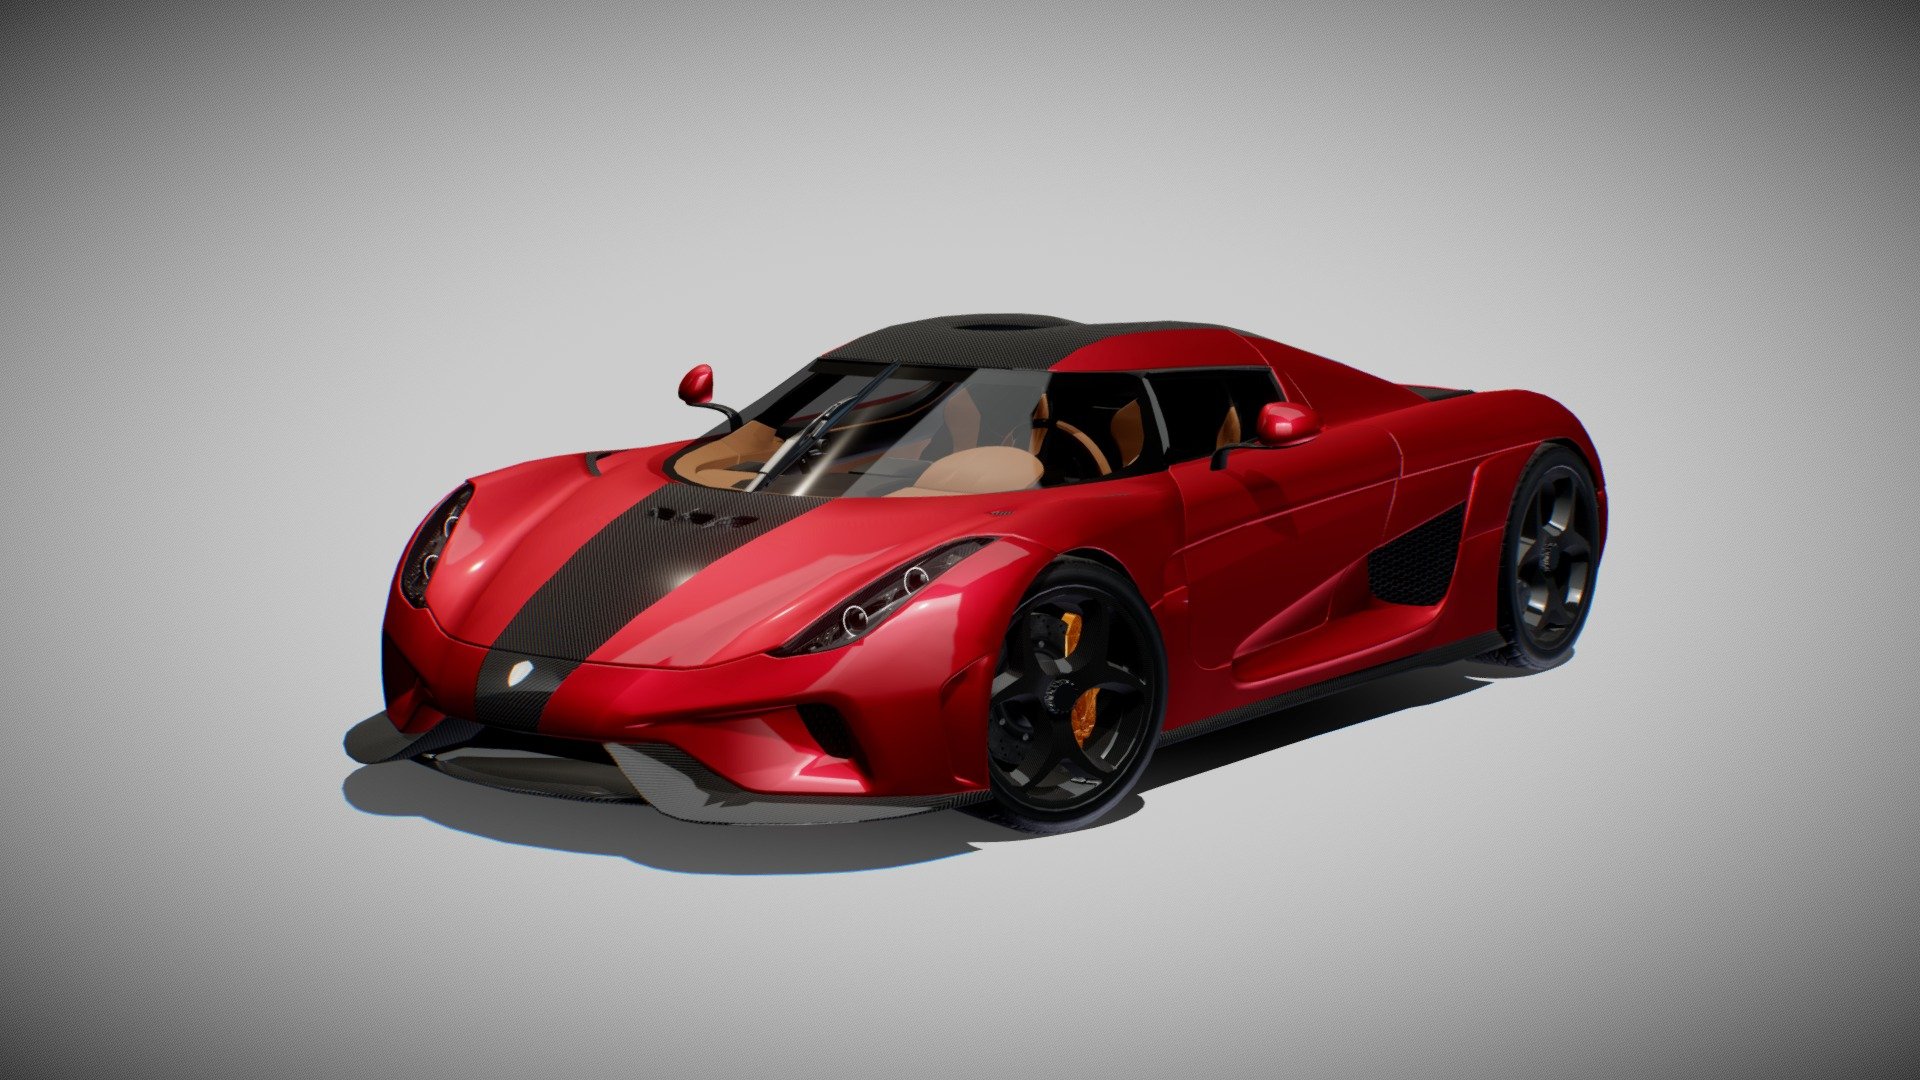 The Koenigsegg Regera is a limited production, plug-in hybrid grand touring sports car manufactured by Swedish automotive manufacturer Koenigsegg. It was unveiled at the March 2015 Geneva Motor Show. The name Regera is a Swedish verb, meaning &ldquo;to reign